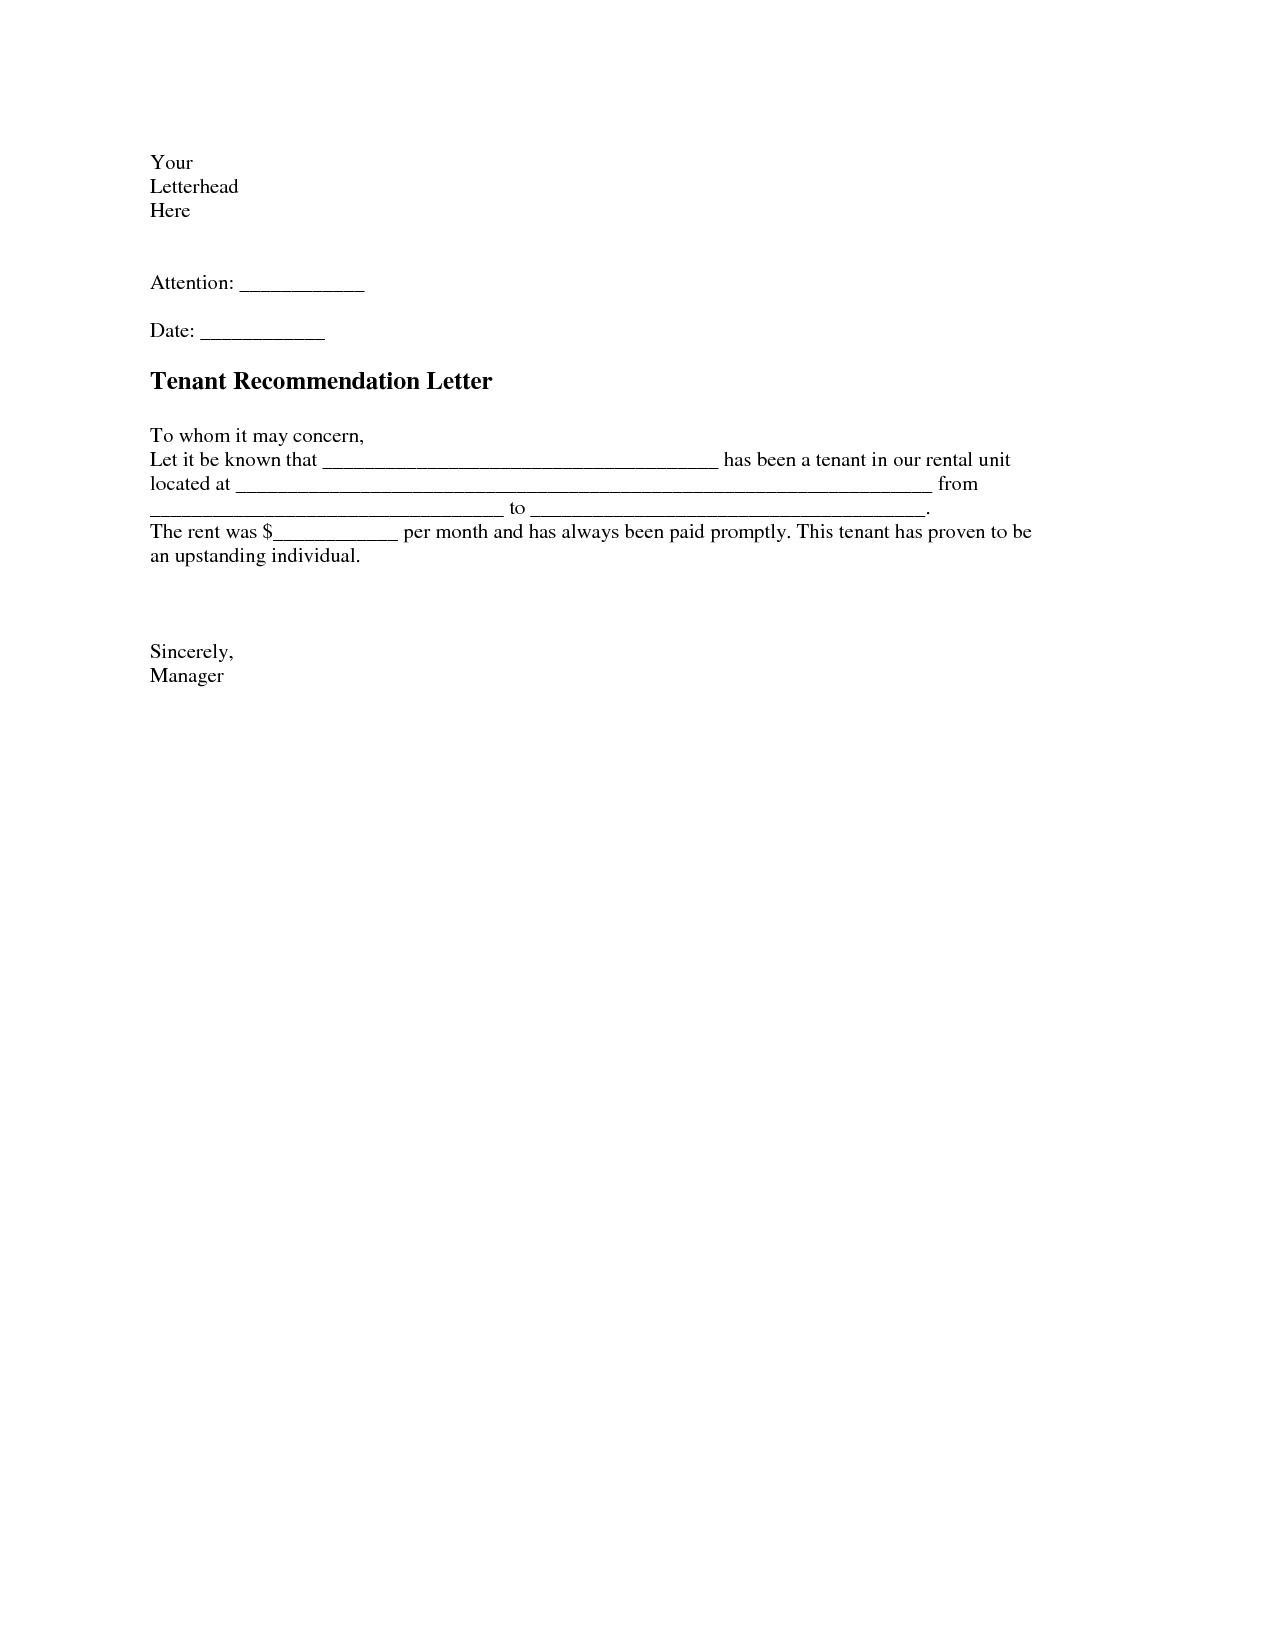 Letter Of Recommendation For Tenant From Employer Enom intended for dimensions 1275 X 1650